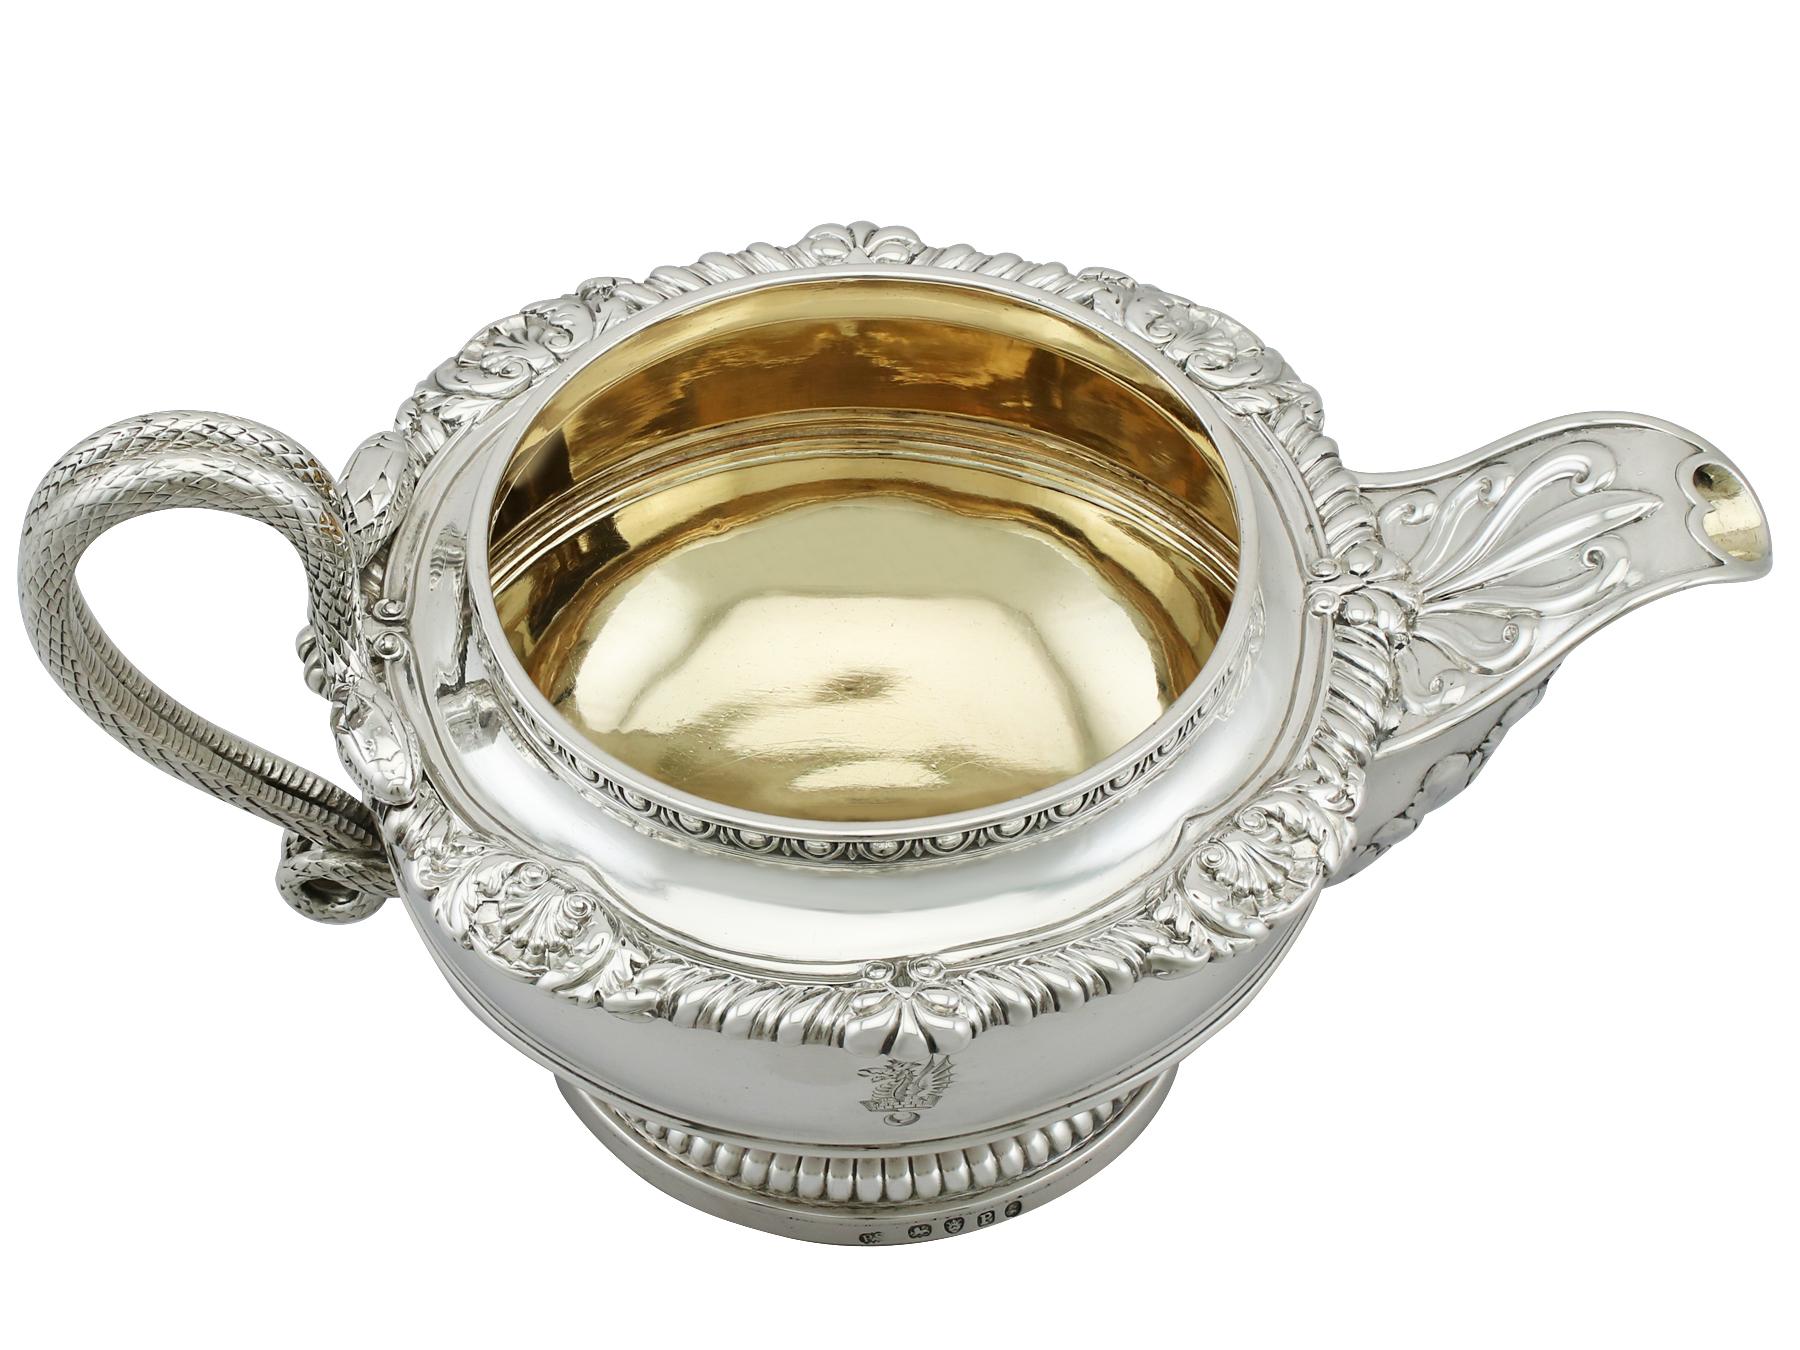 An magnificent, fine and impressive, antique George III English sterling silver cream jug made by Paul Storr; an addition to our Georgian silver teaware collection.

This magnificent antique Georgian sterling silver cream jug has a circular rounded